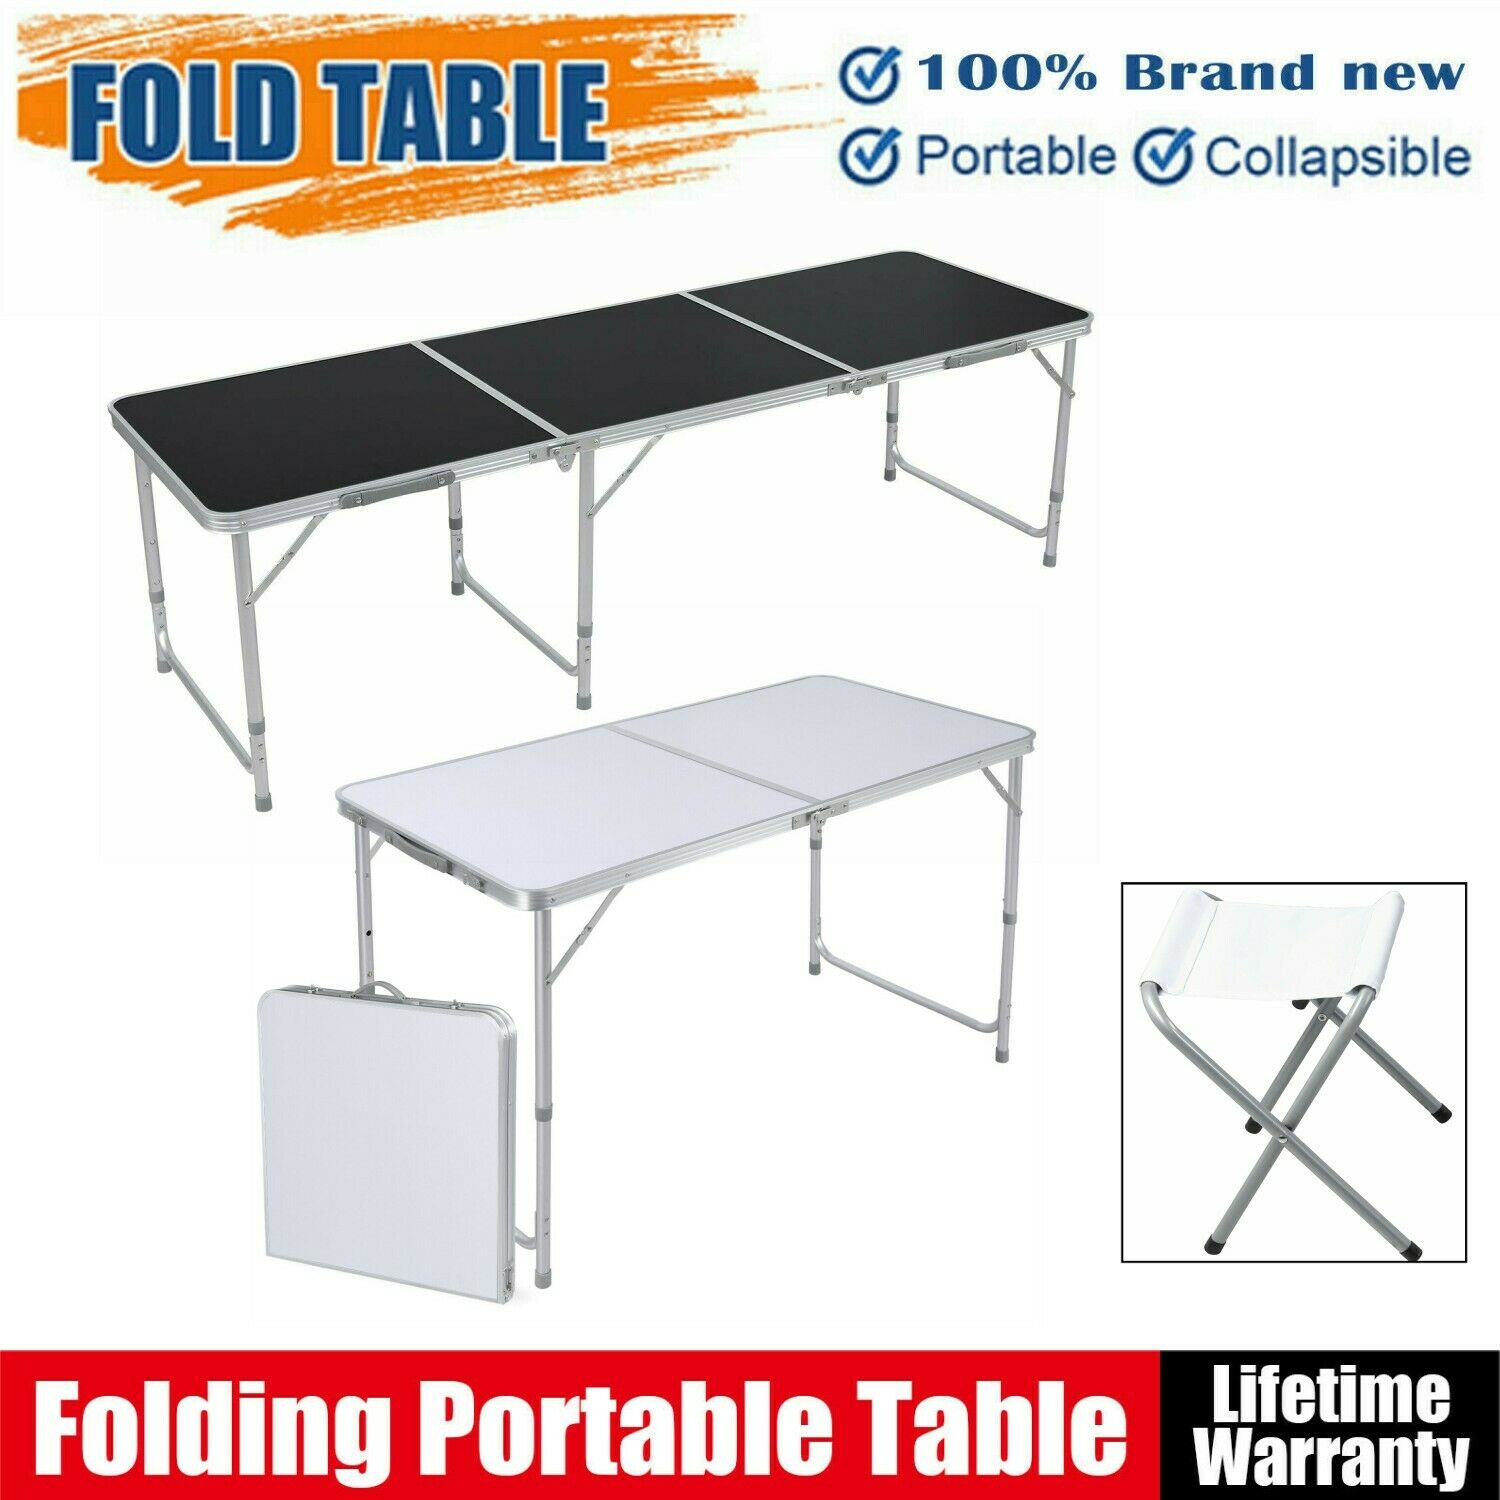 4 6FT Folding Table Portable Outdoor Picnic Party Travel Dining Camp+4/6 Chairs